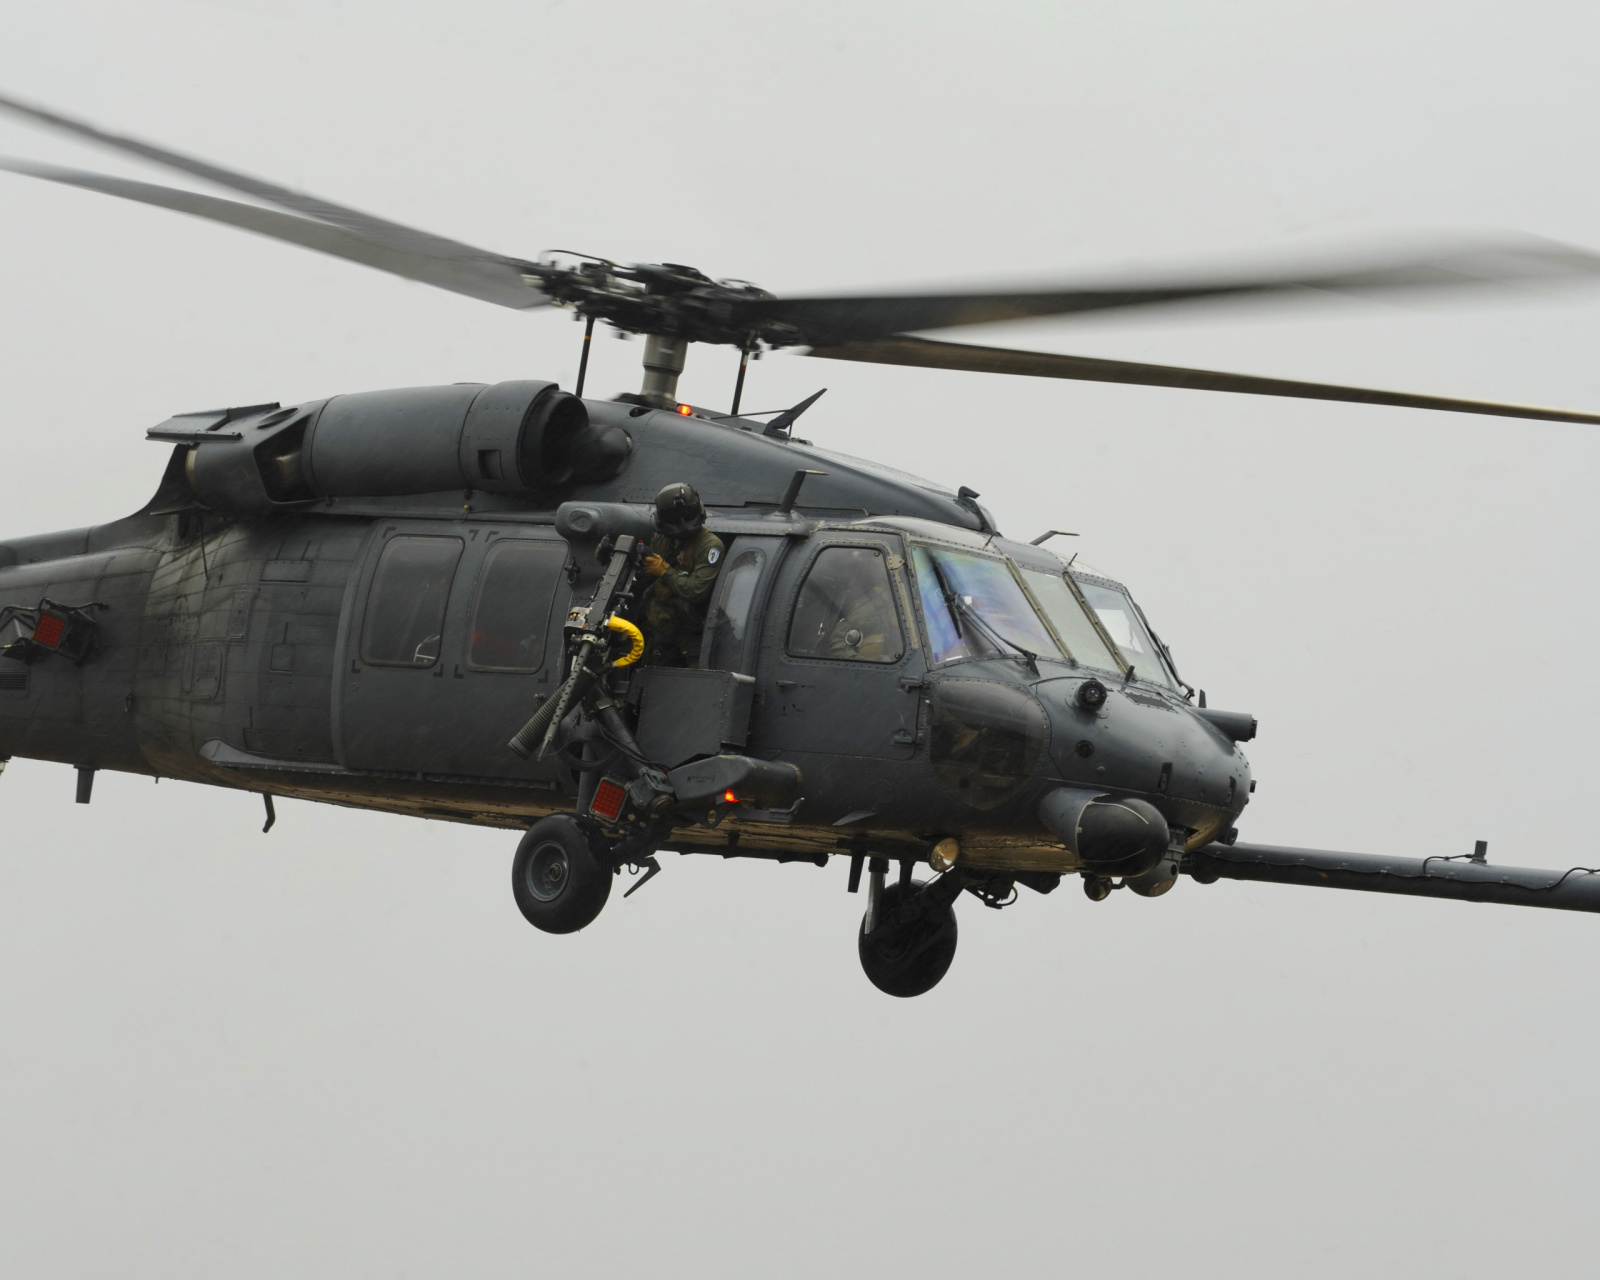 Helicopter Sikorsky HH 60 Pave Hawk wallpaper 1600x1280